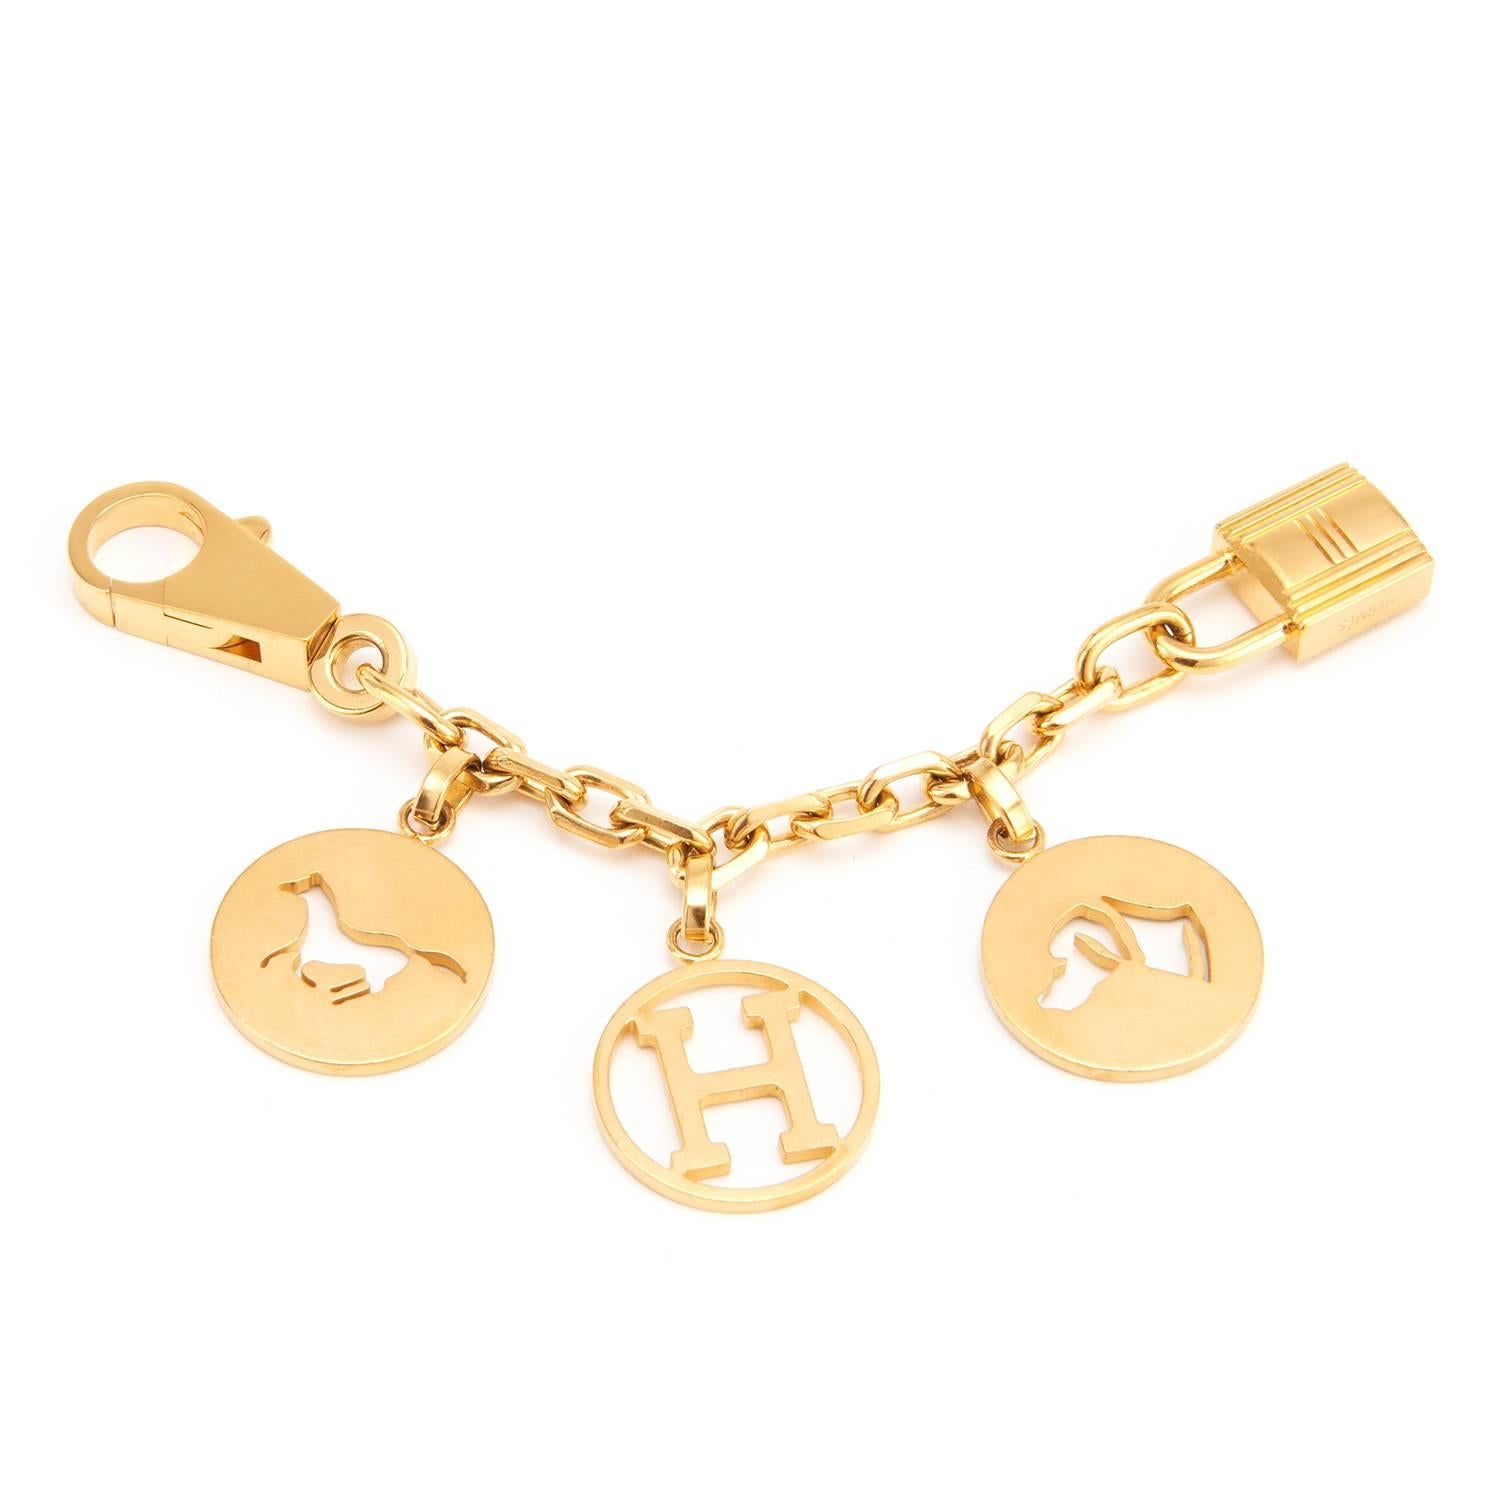 Hermes Breloque Charm Gold GHW Bag Charm for Birkin or Kelly  
Extremely rare piece!
A most adorable Hermes bag charm in desirable GOLD for your Birkin or Kelly. 
Featuring the iconic horse, dog, and H charms on a chain, the Breloque Charm is one of